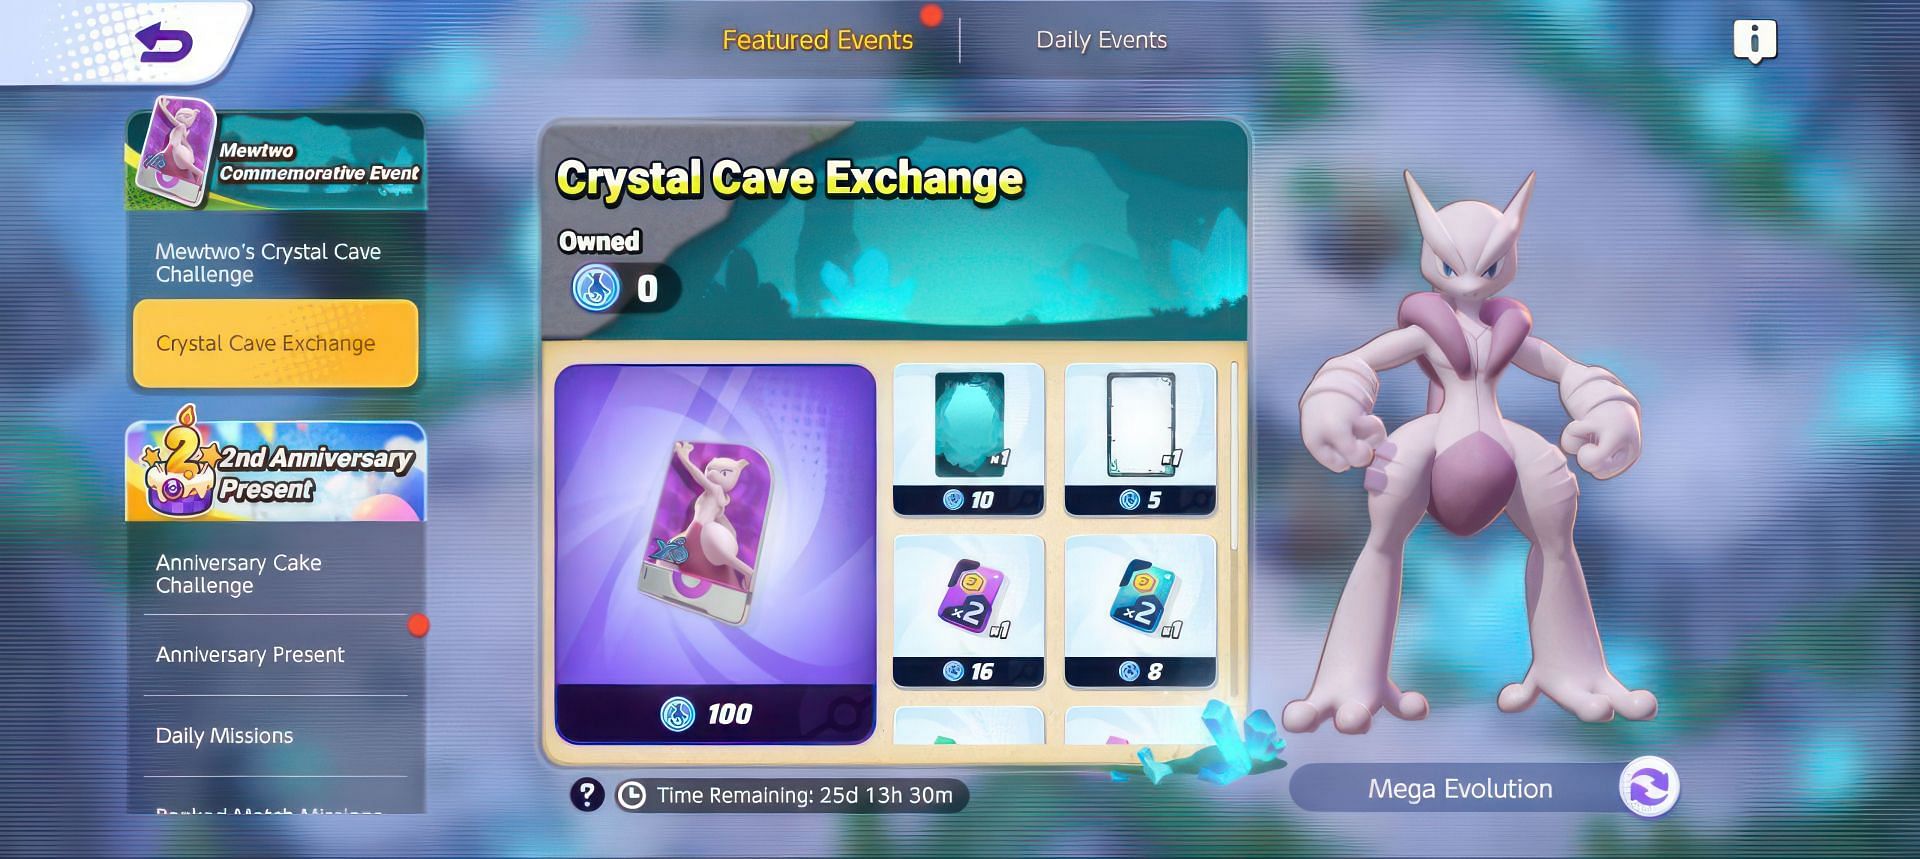 Pokémon UNITE on X: Mewtwo's Crystal Cave Challenge is now available in  the #UNITE2nd Anniversary! Complete missions, move through the cave, and  collect rewards! Earn enough Cave Coins, and you can redeem